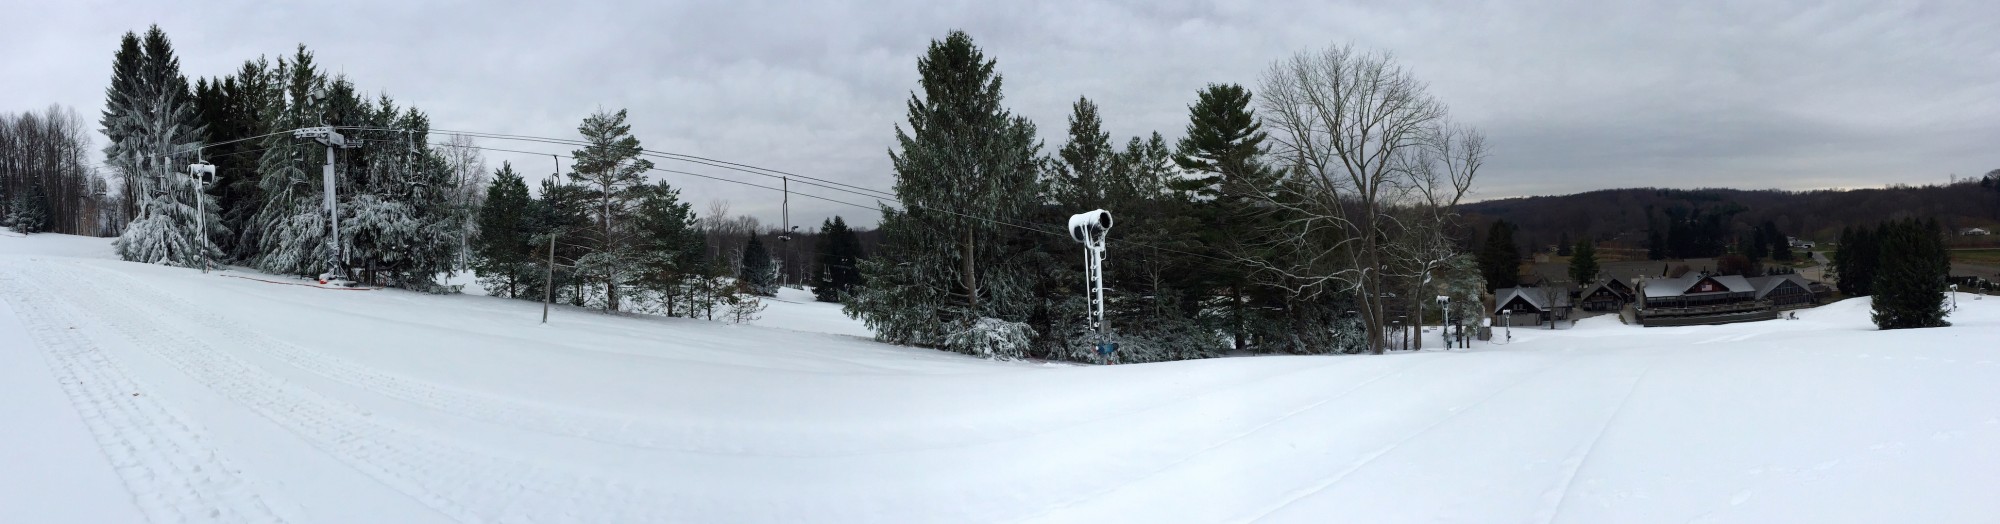 After First December #STsnowmaking Campaign 2014